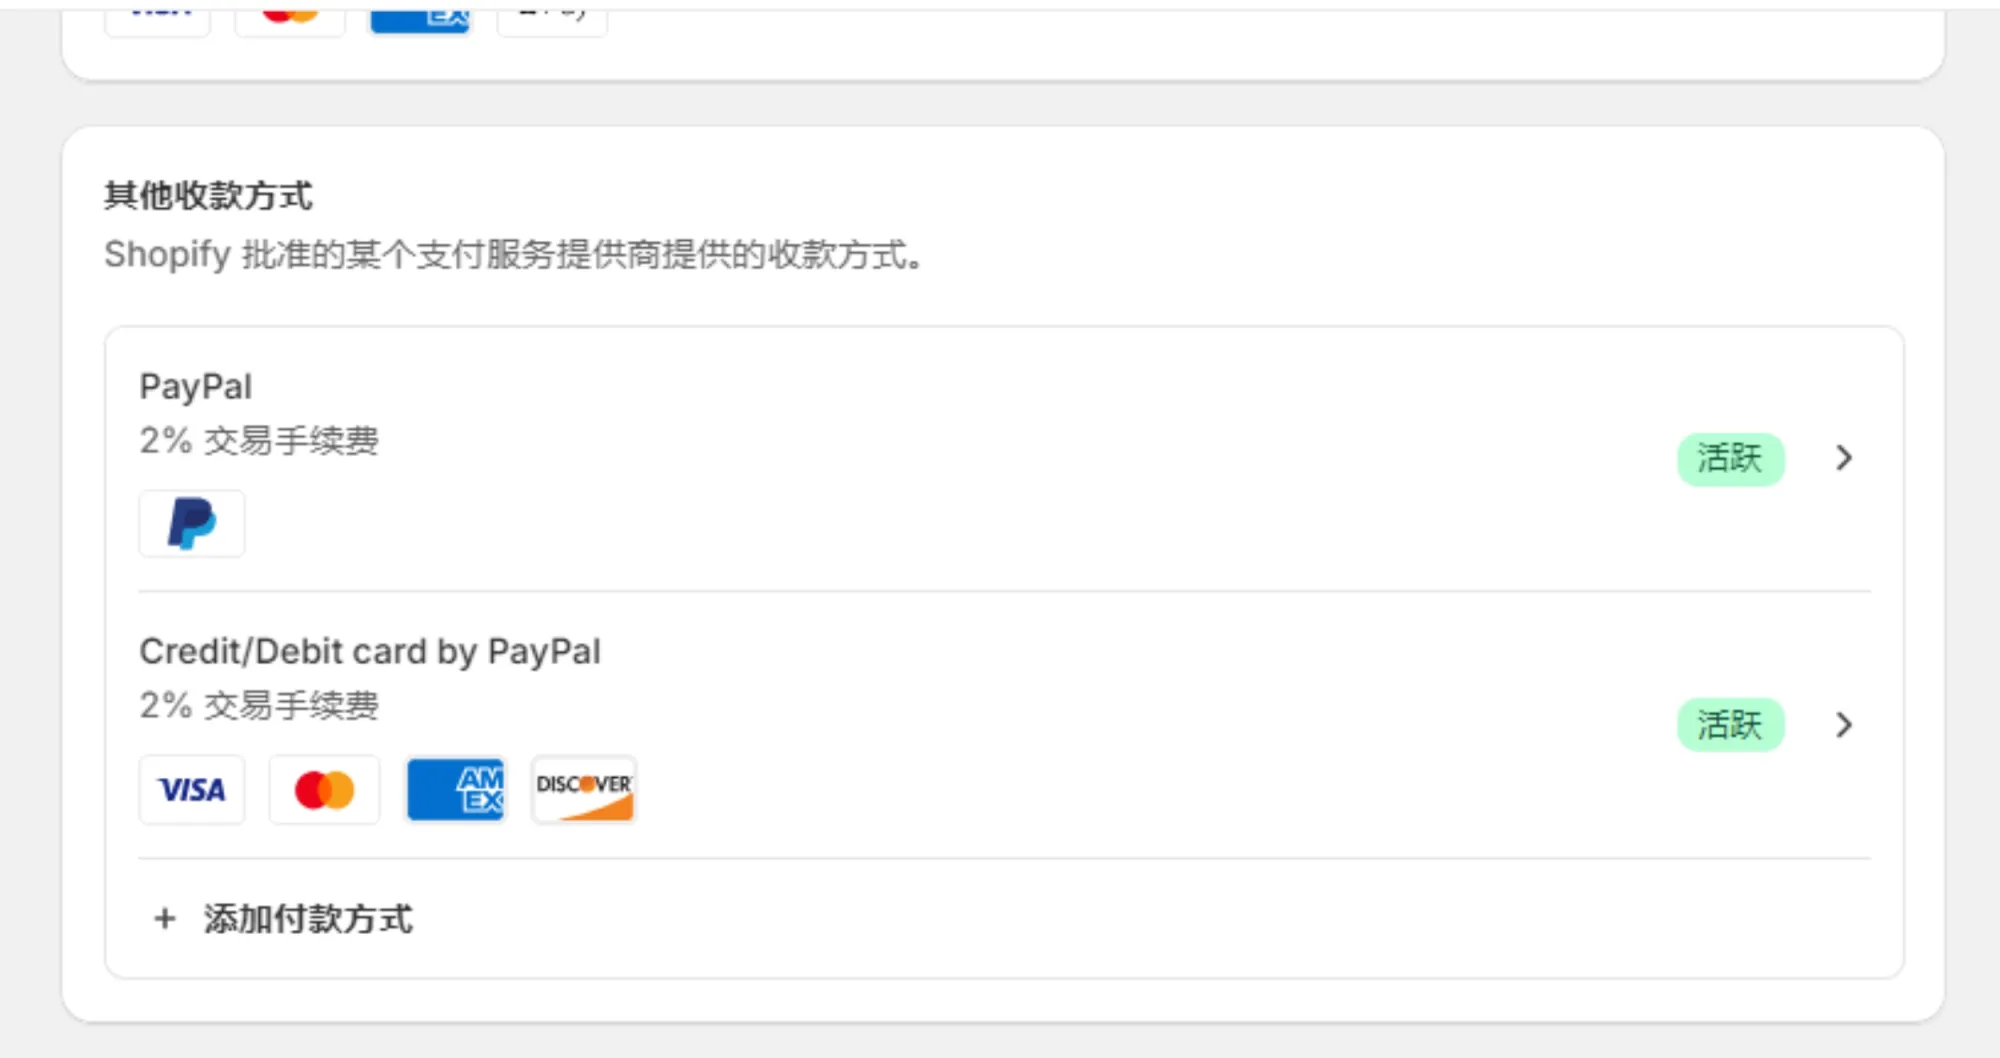 enable-paypal-credit-card-checkout-for-shopify